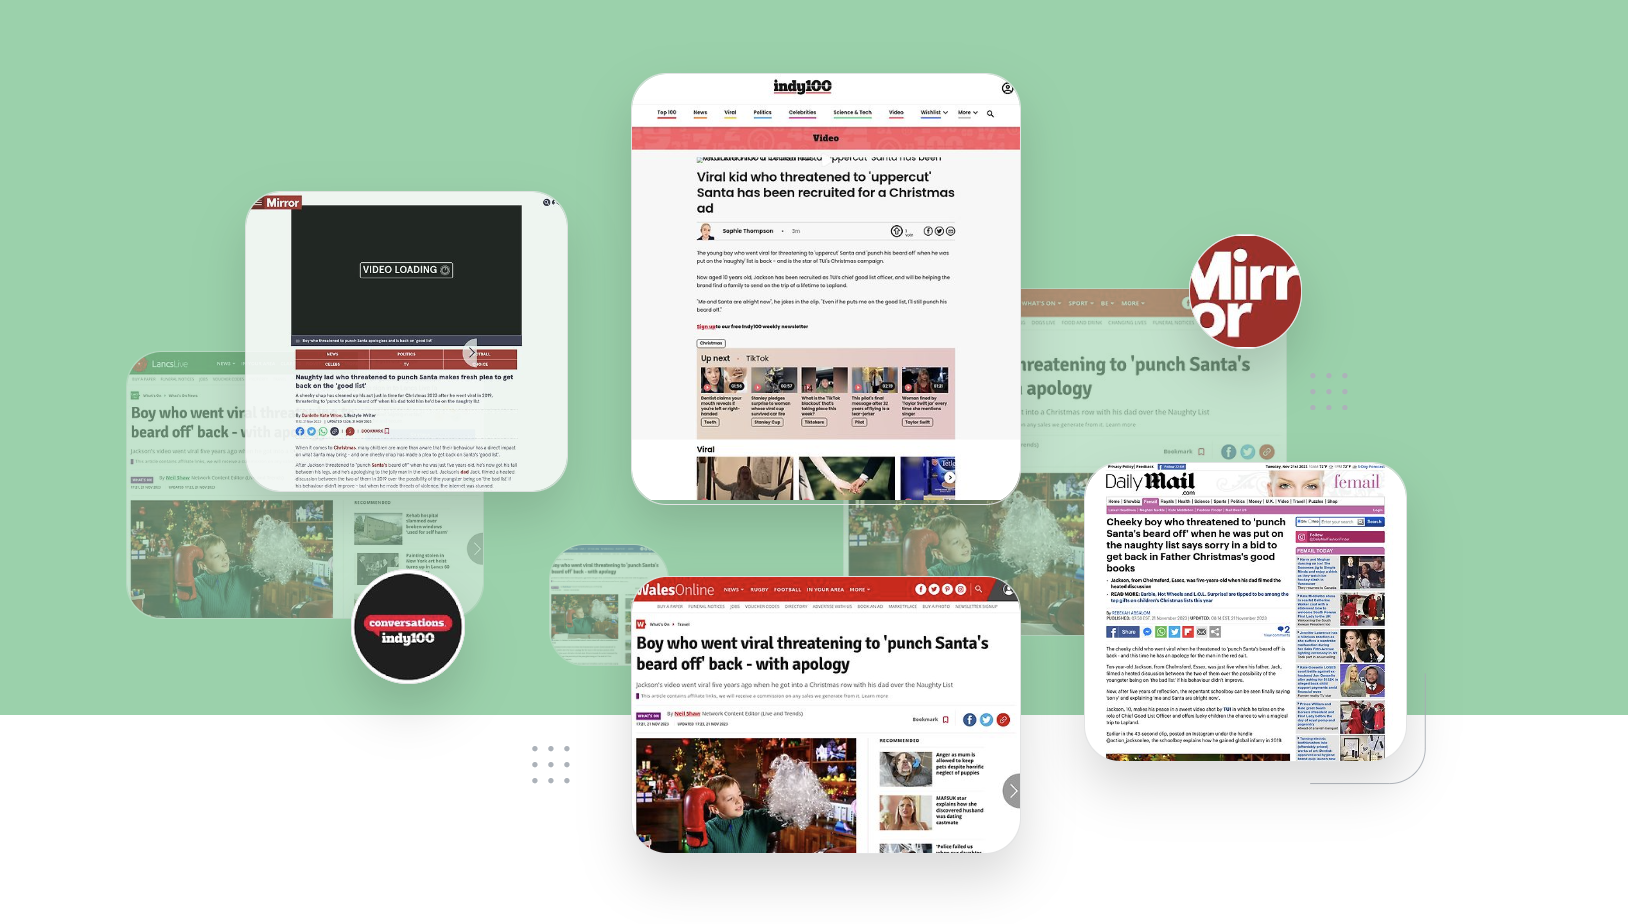 Montage of TUI PR Campaign Coverage Featuring 52 Top-Tier Media Links